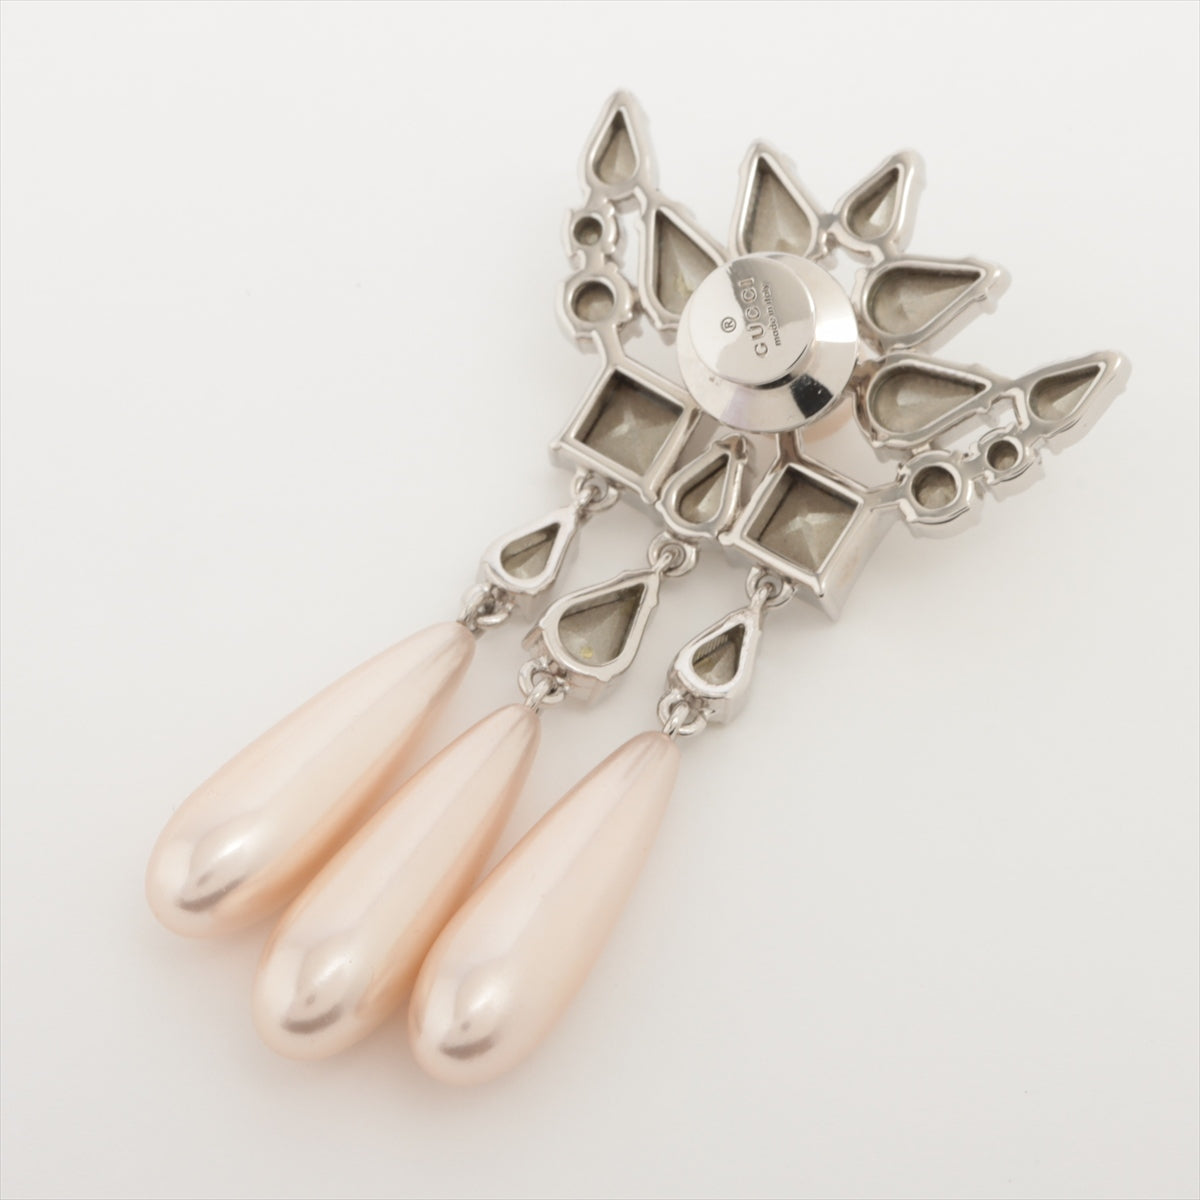 Rose gold Flora diamond & 18kt rose gold earrings | Gucci | MATCHES UK